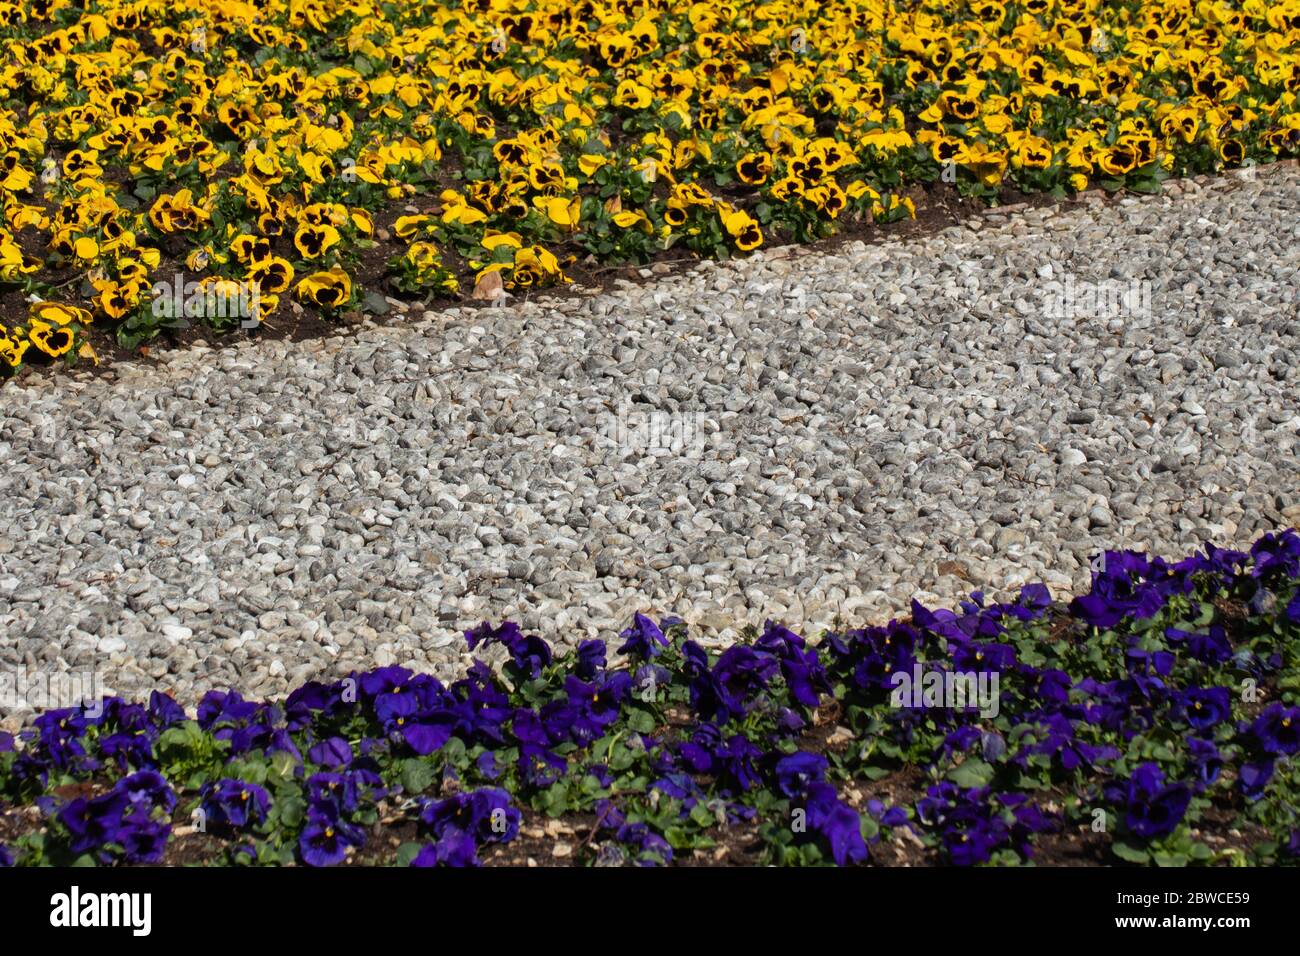 Metal edging separating different colors of gravel and blue and yellow pansies in a park, Viola tricolor Stock Photo